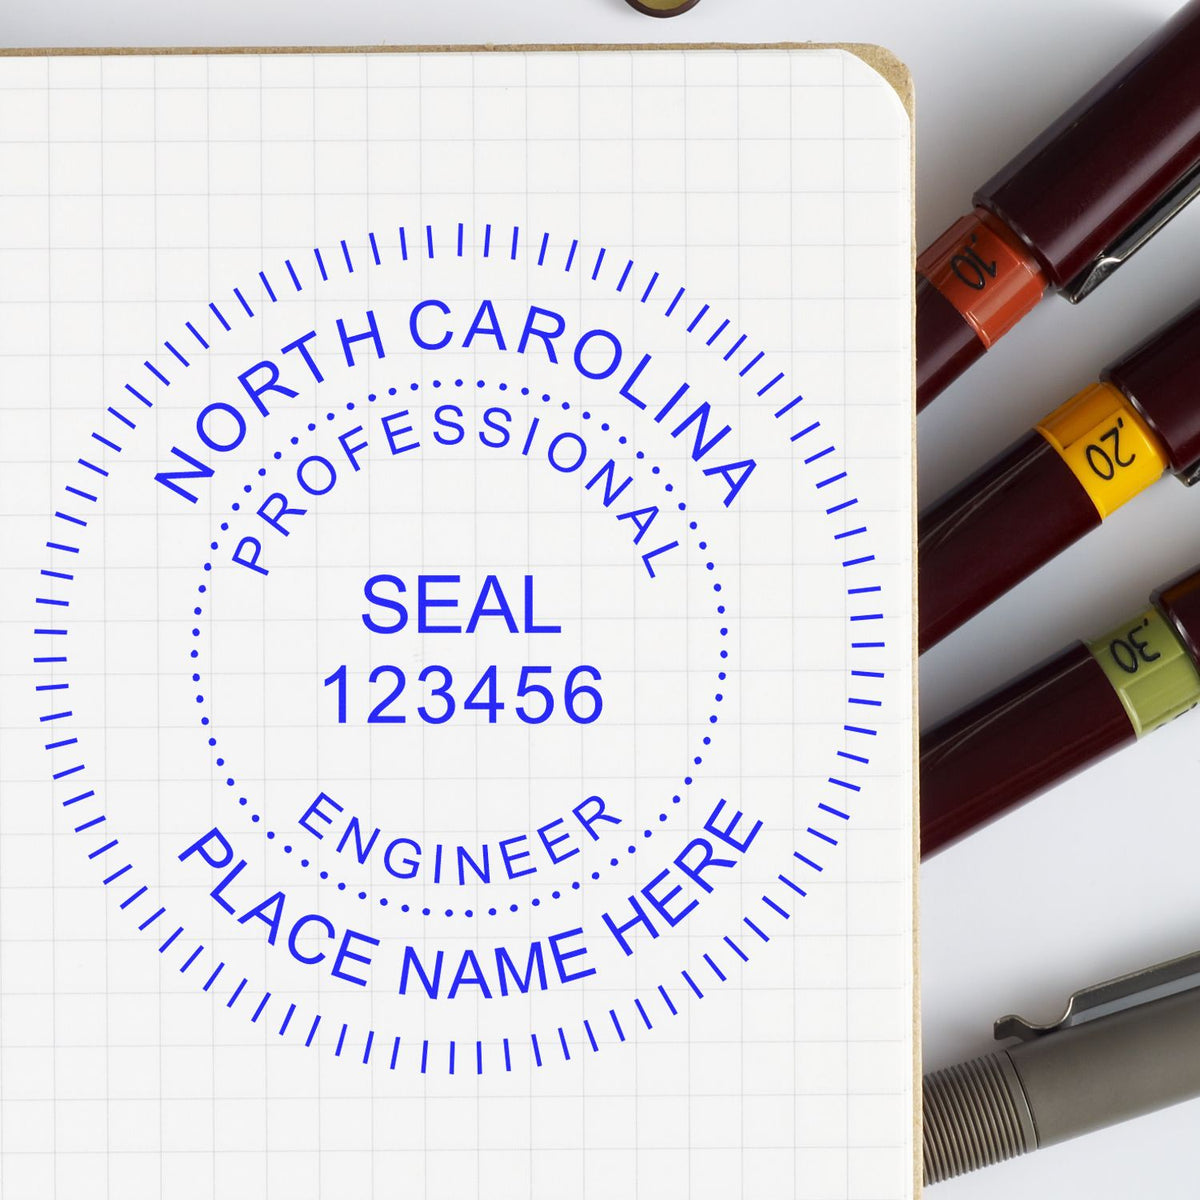 The Slim Pre-Inked North Carolina Professional Engineer Seal Stamp stamp impression comes to life with a crisp, detailed photo on paper - showcasing true professional quality.